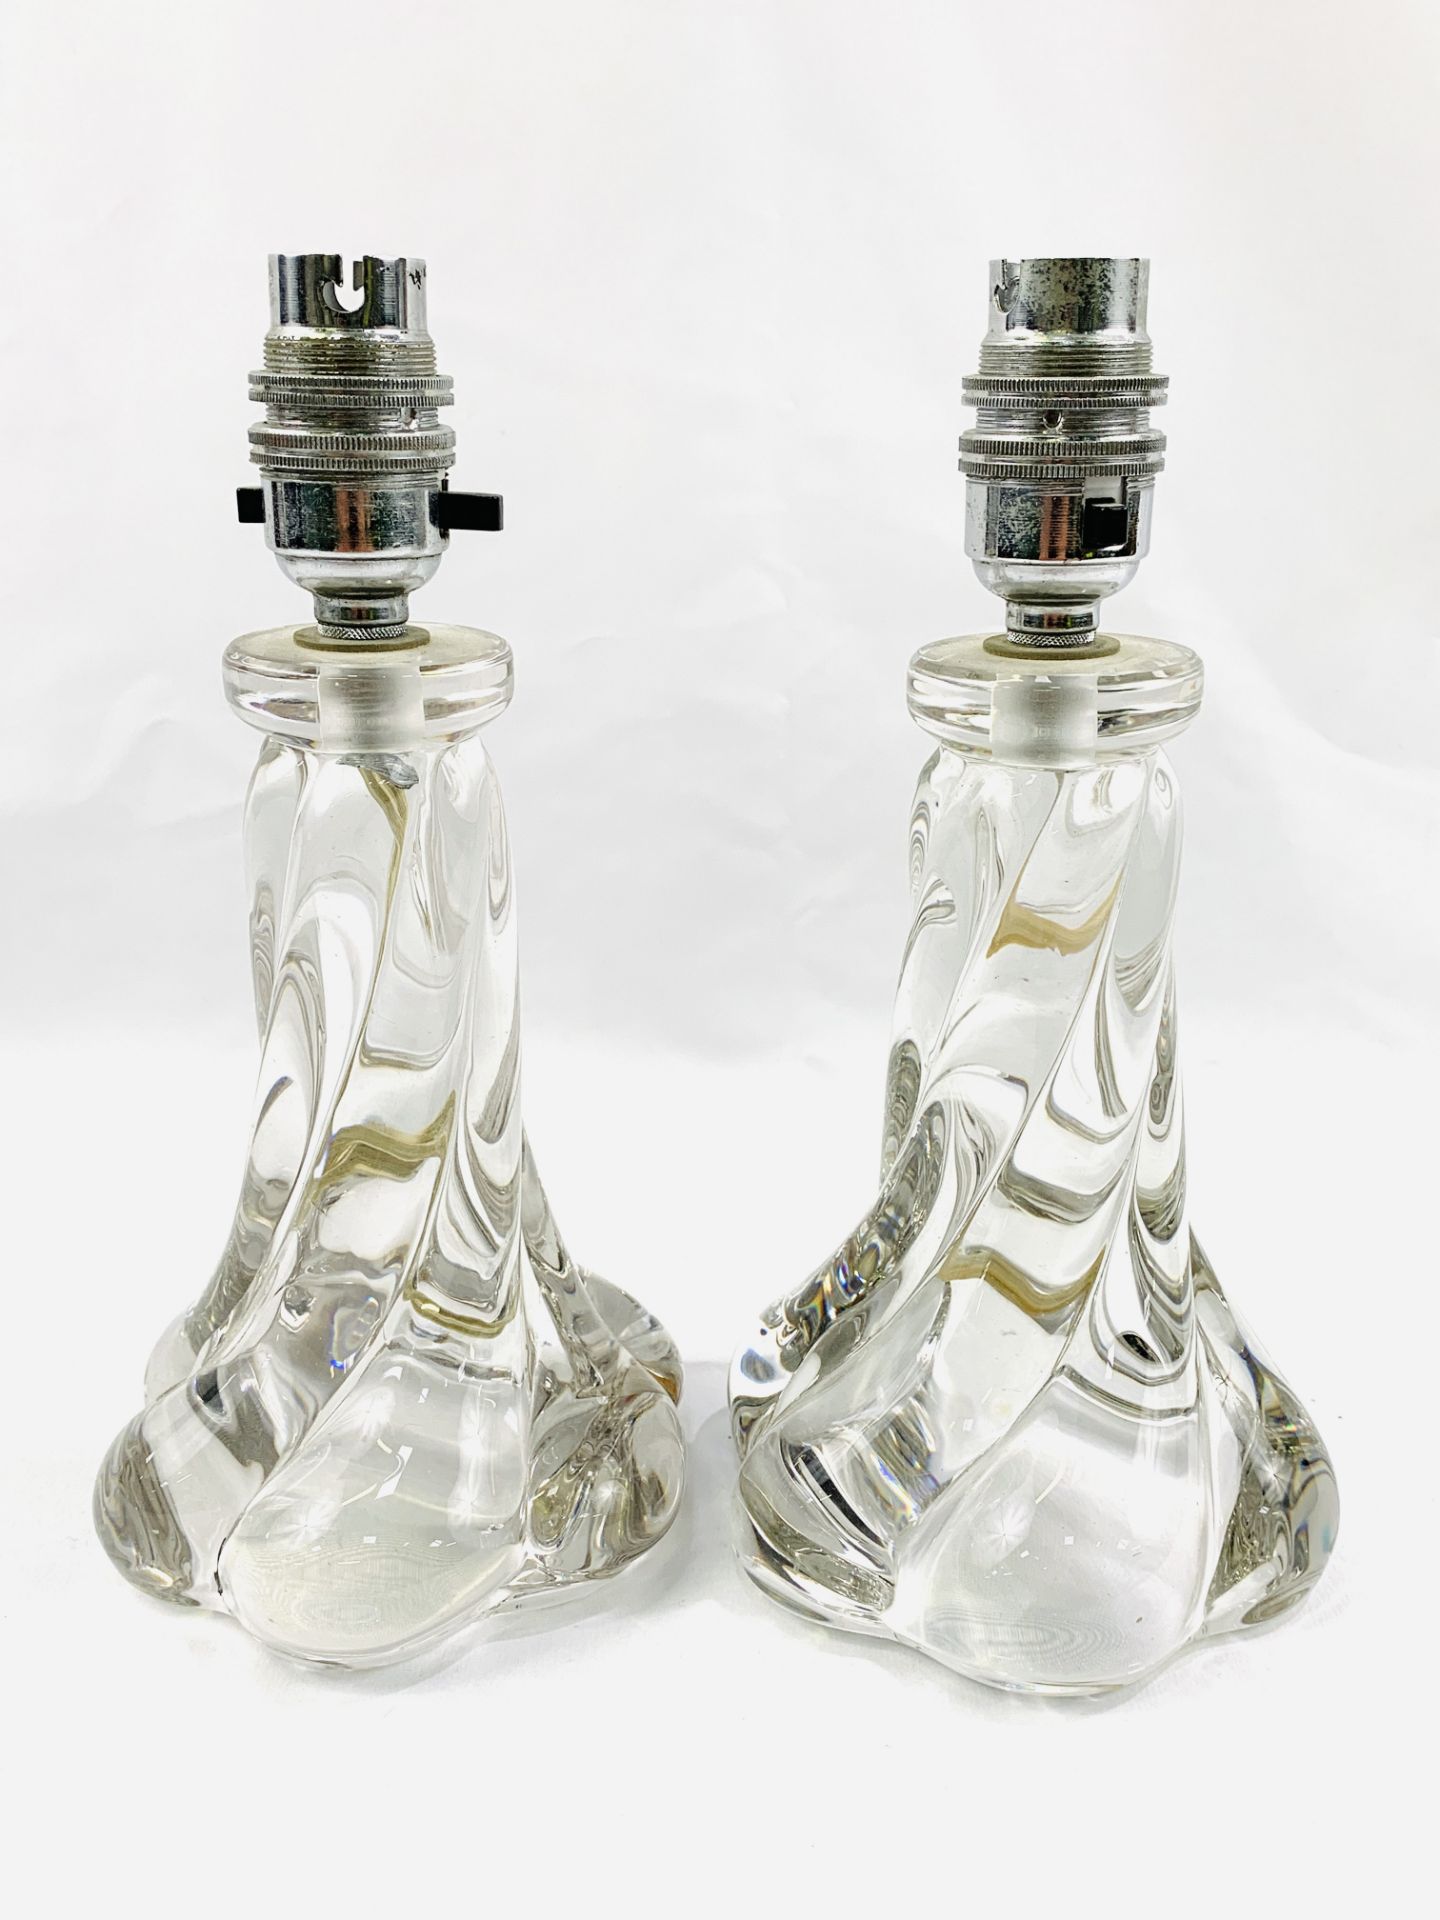 Pair of 1950's French glass table lamps - Image 3 of 3